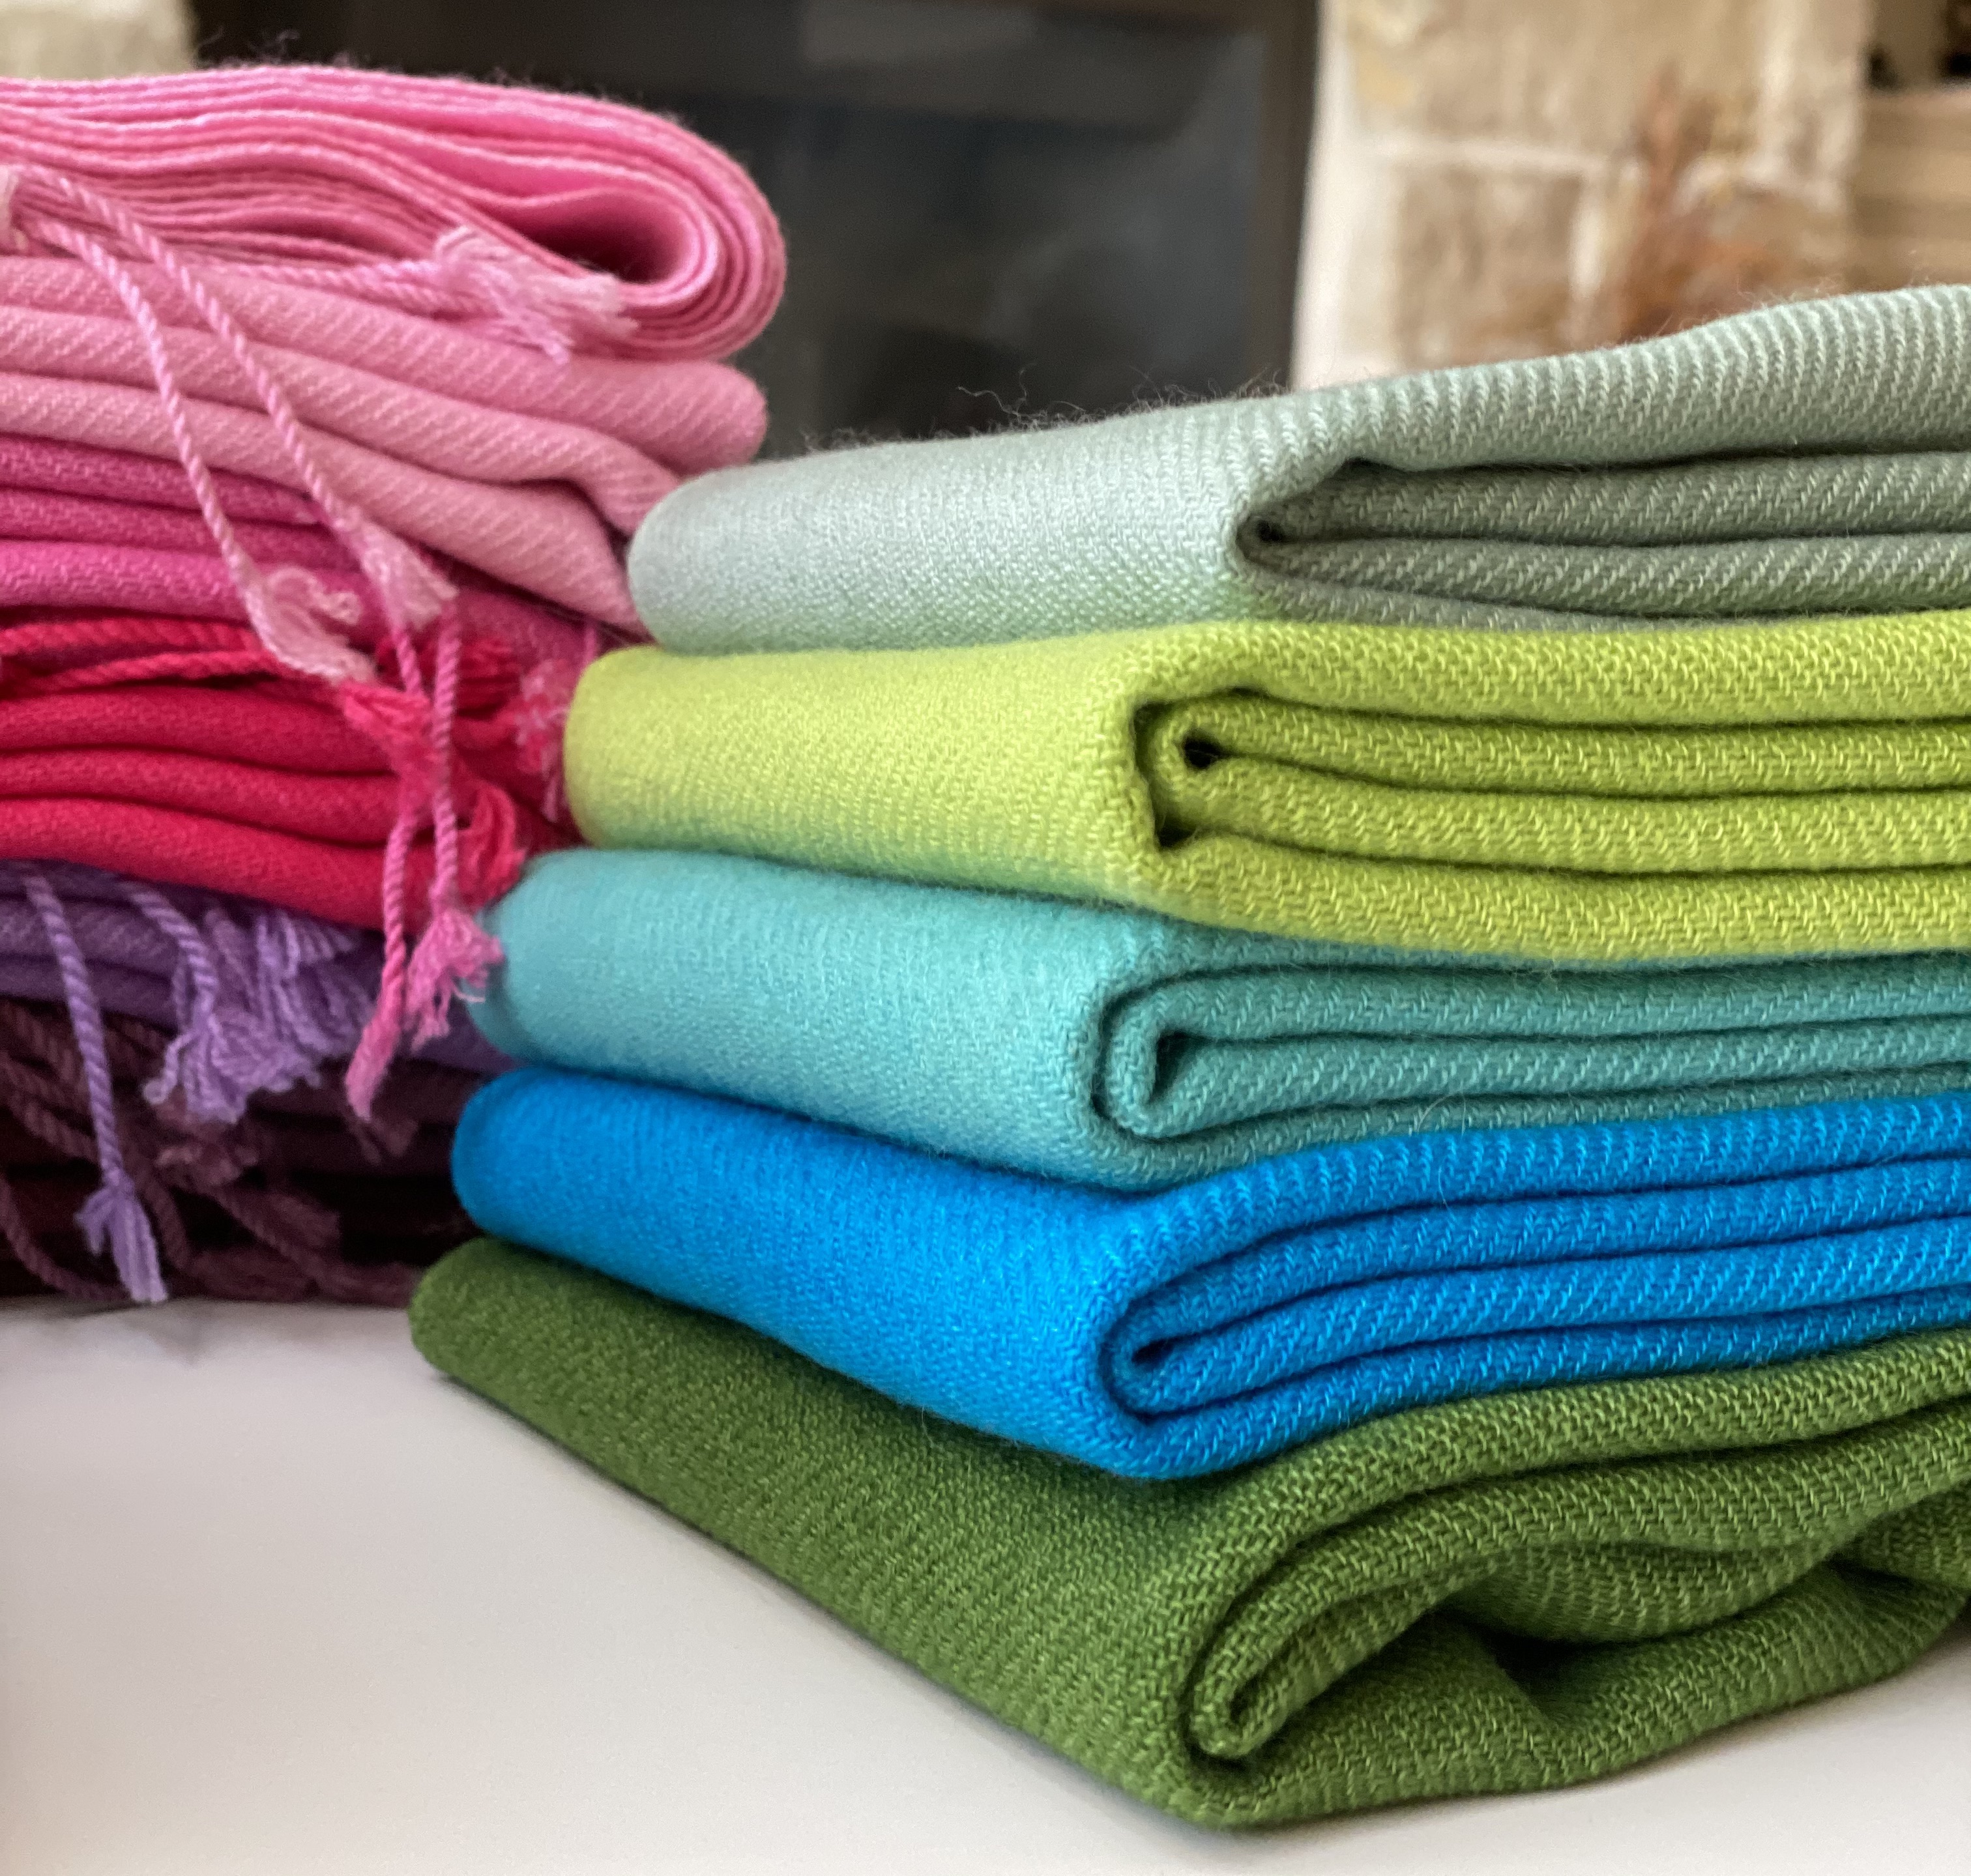 Cashmere Pashmina Wraps and Shawls are Always a Top Gift.